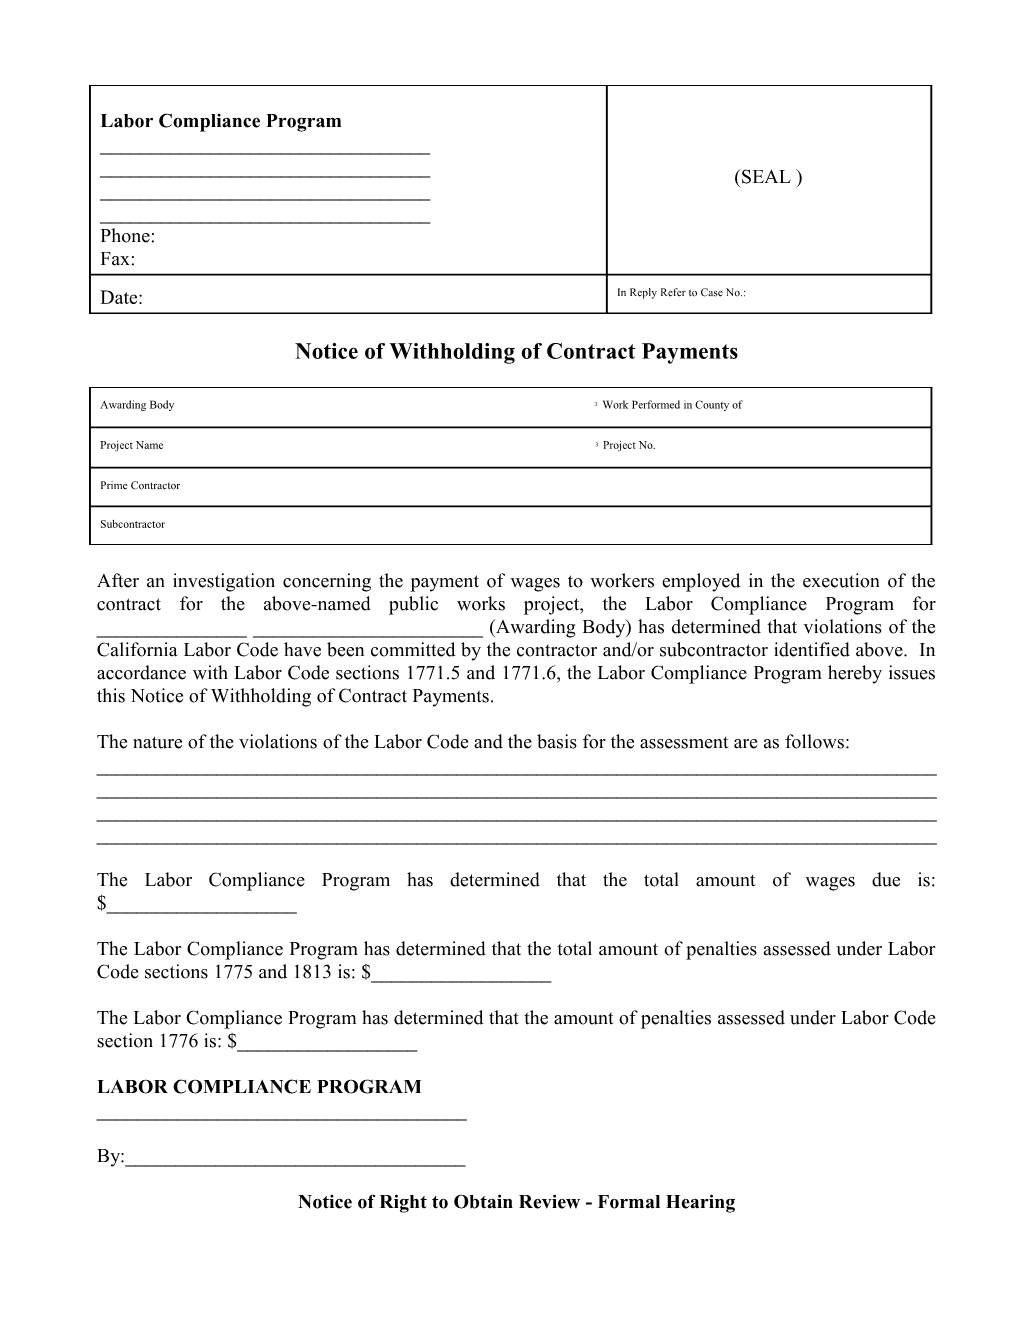 Notice of Withholding of Contract Payments